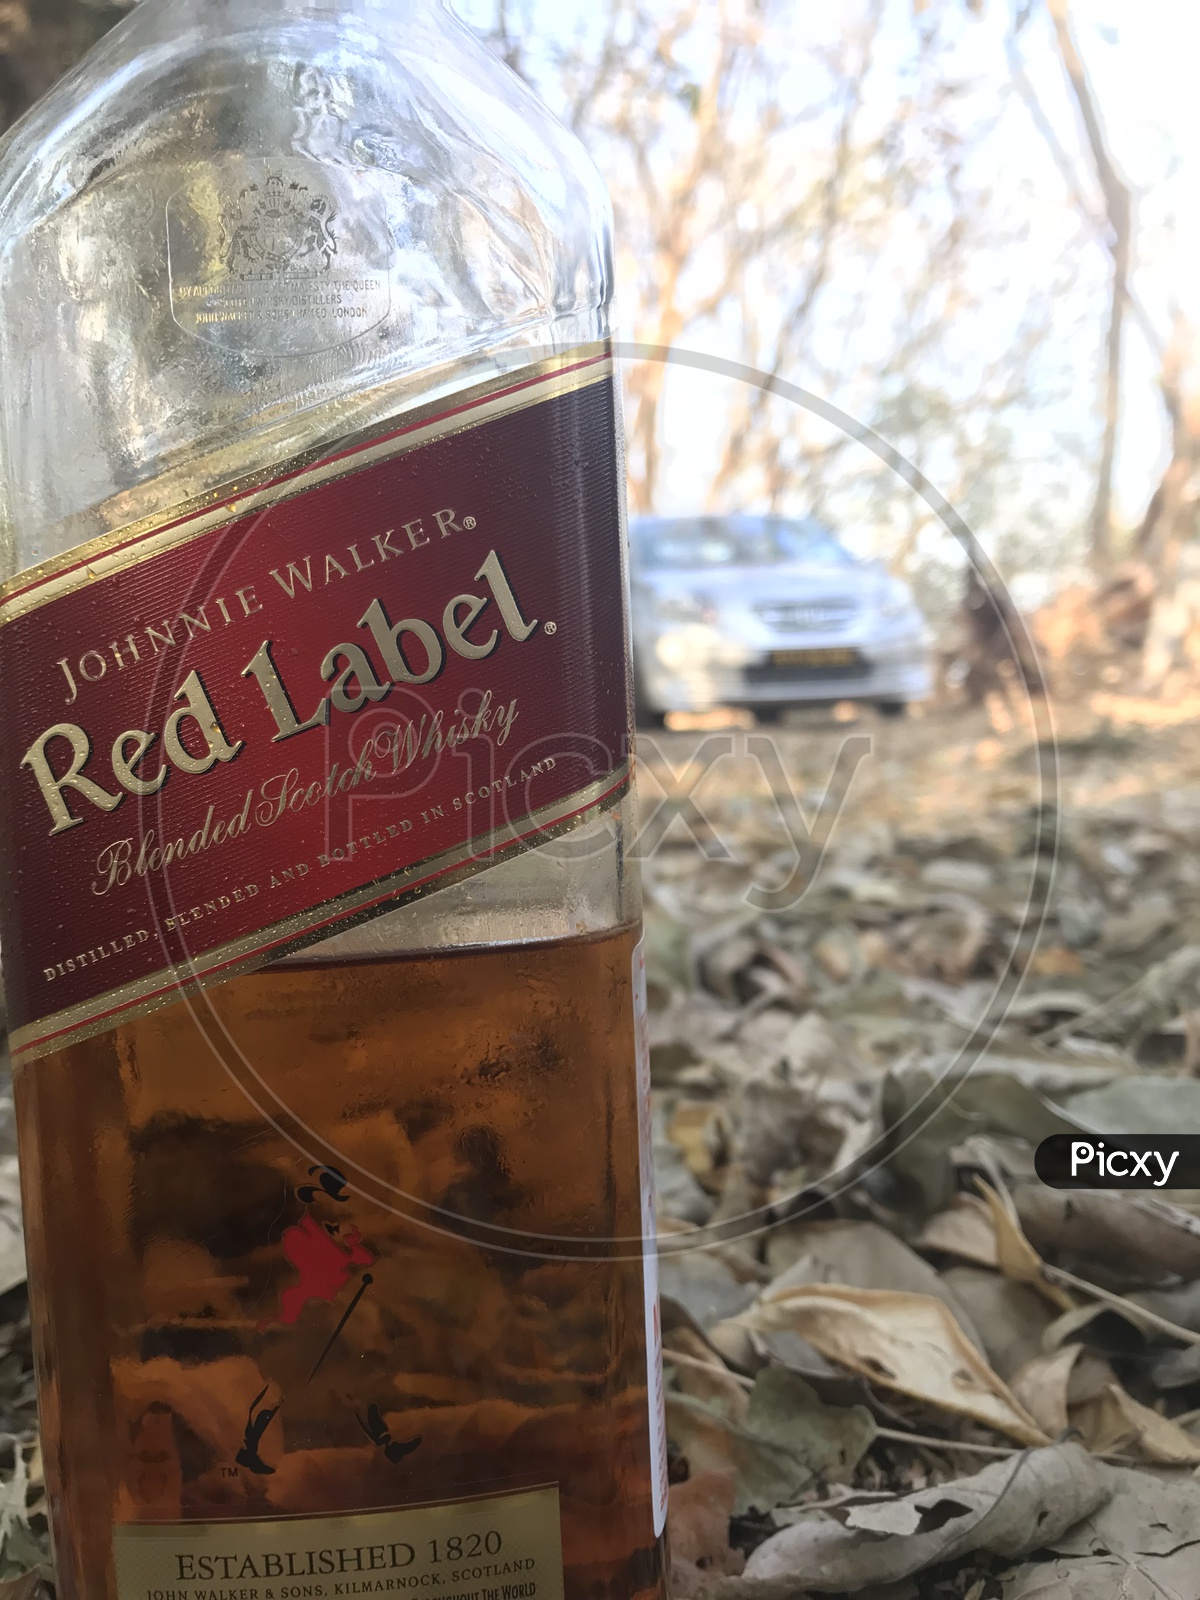 Red label, Alcohol